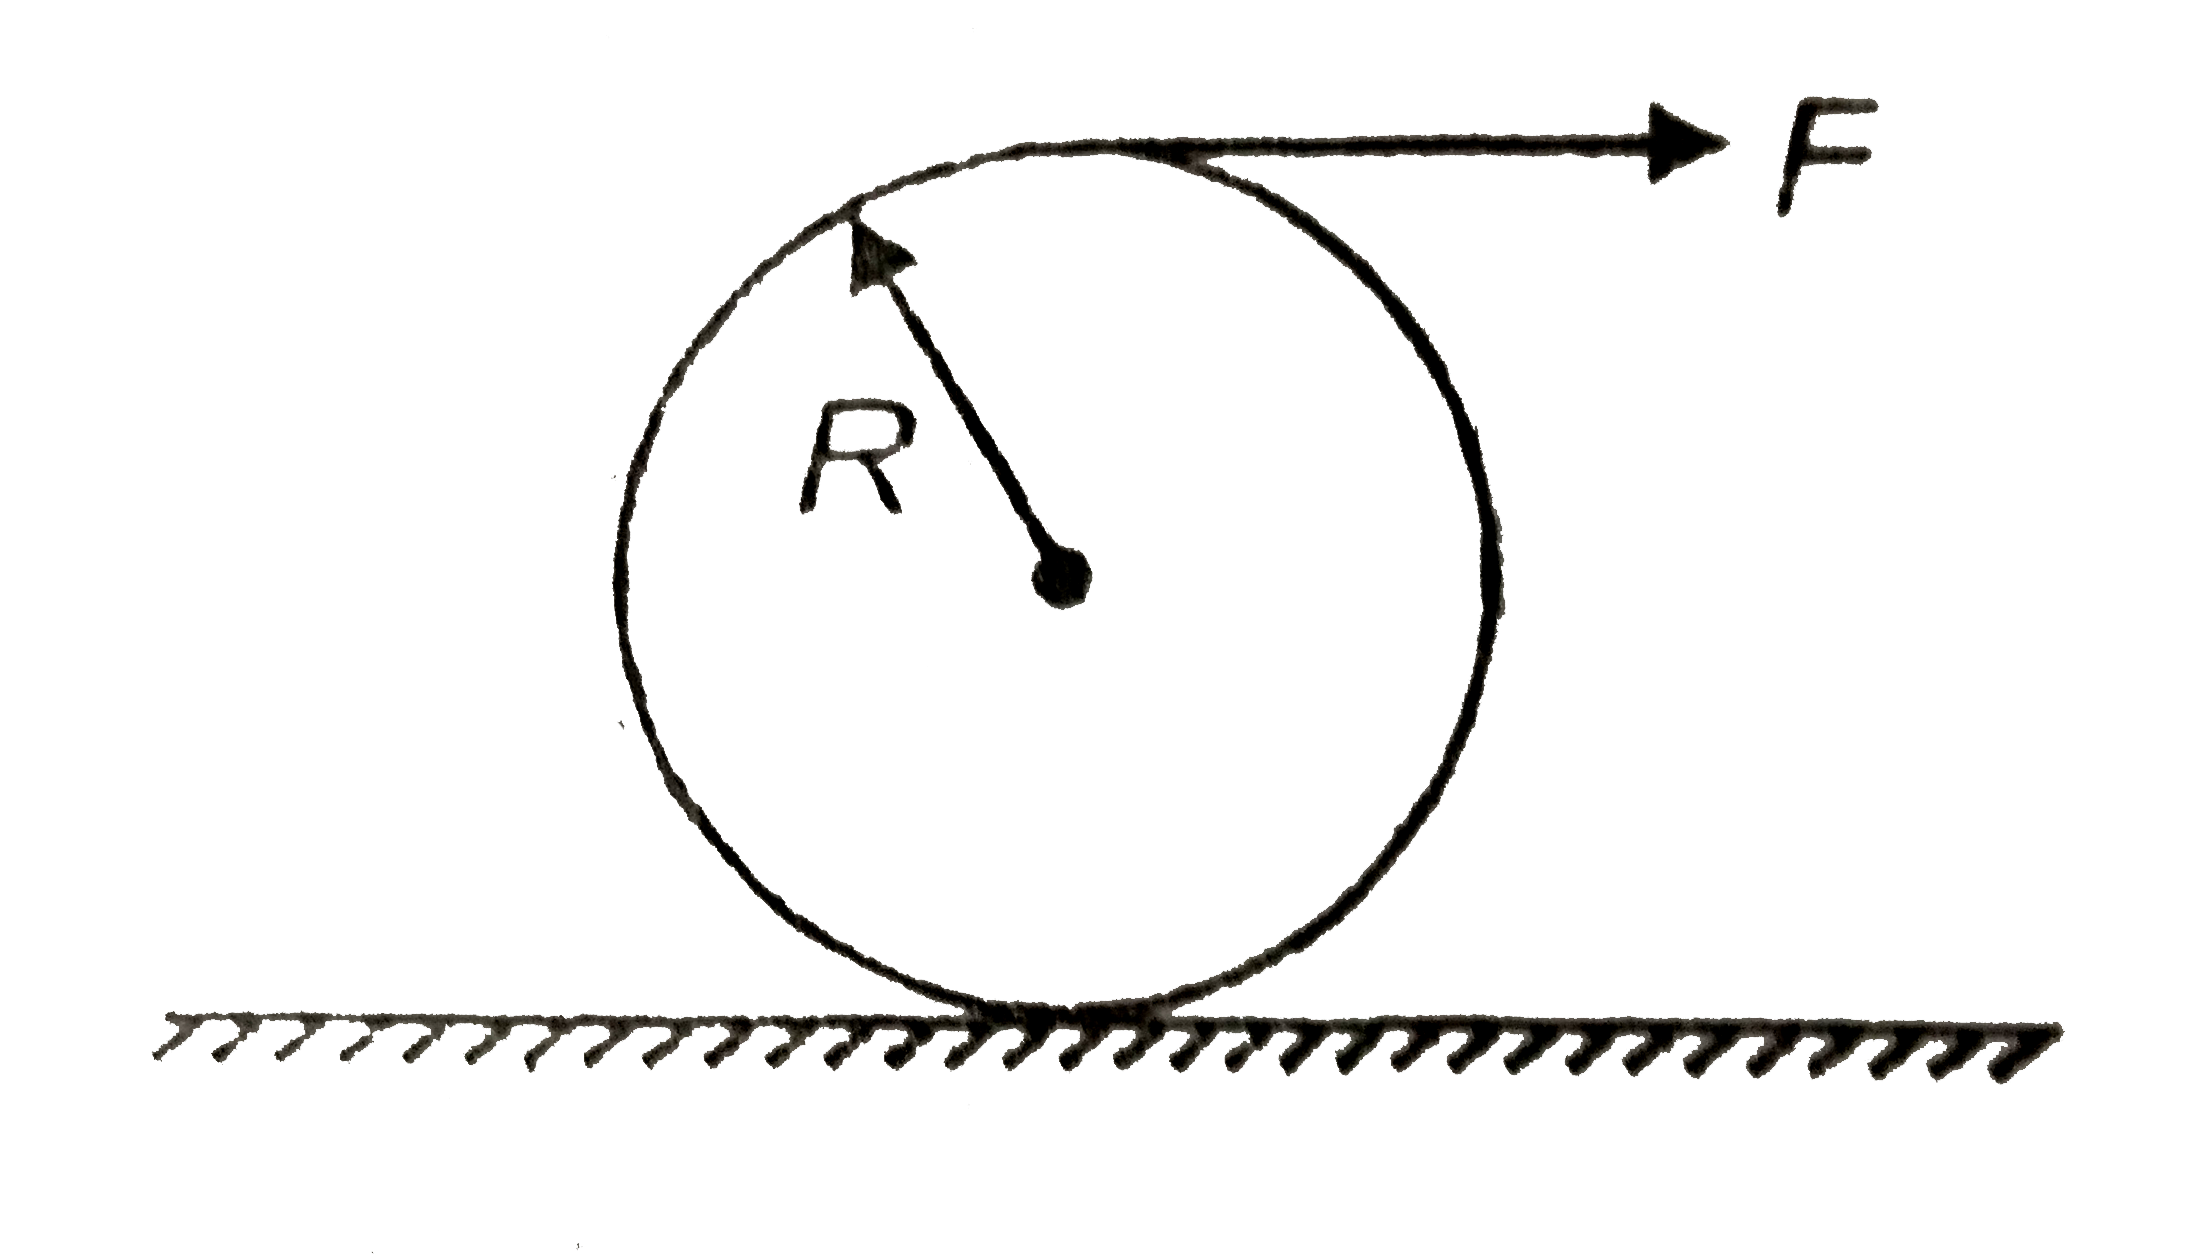 A ring of mass m and radius R is acted upon by a force F as shown in the figure. There os sufficient friction between the ring and the ground. The force of friciton force necessary for pure rolling is